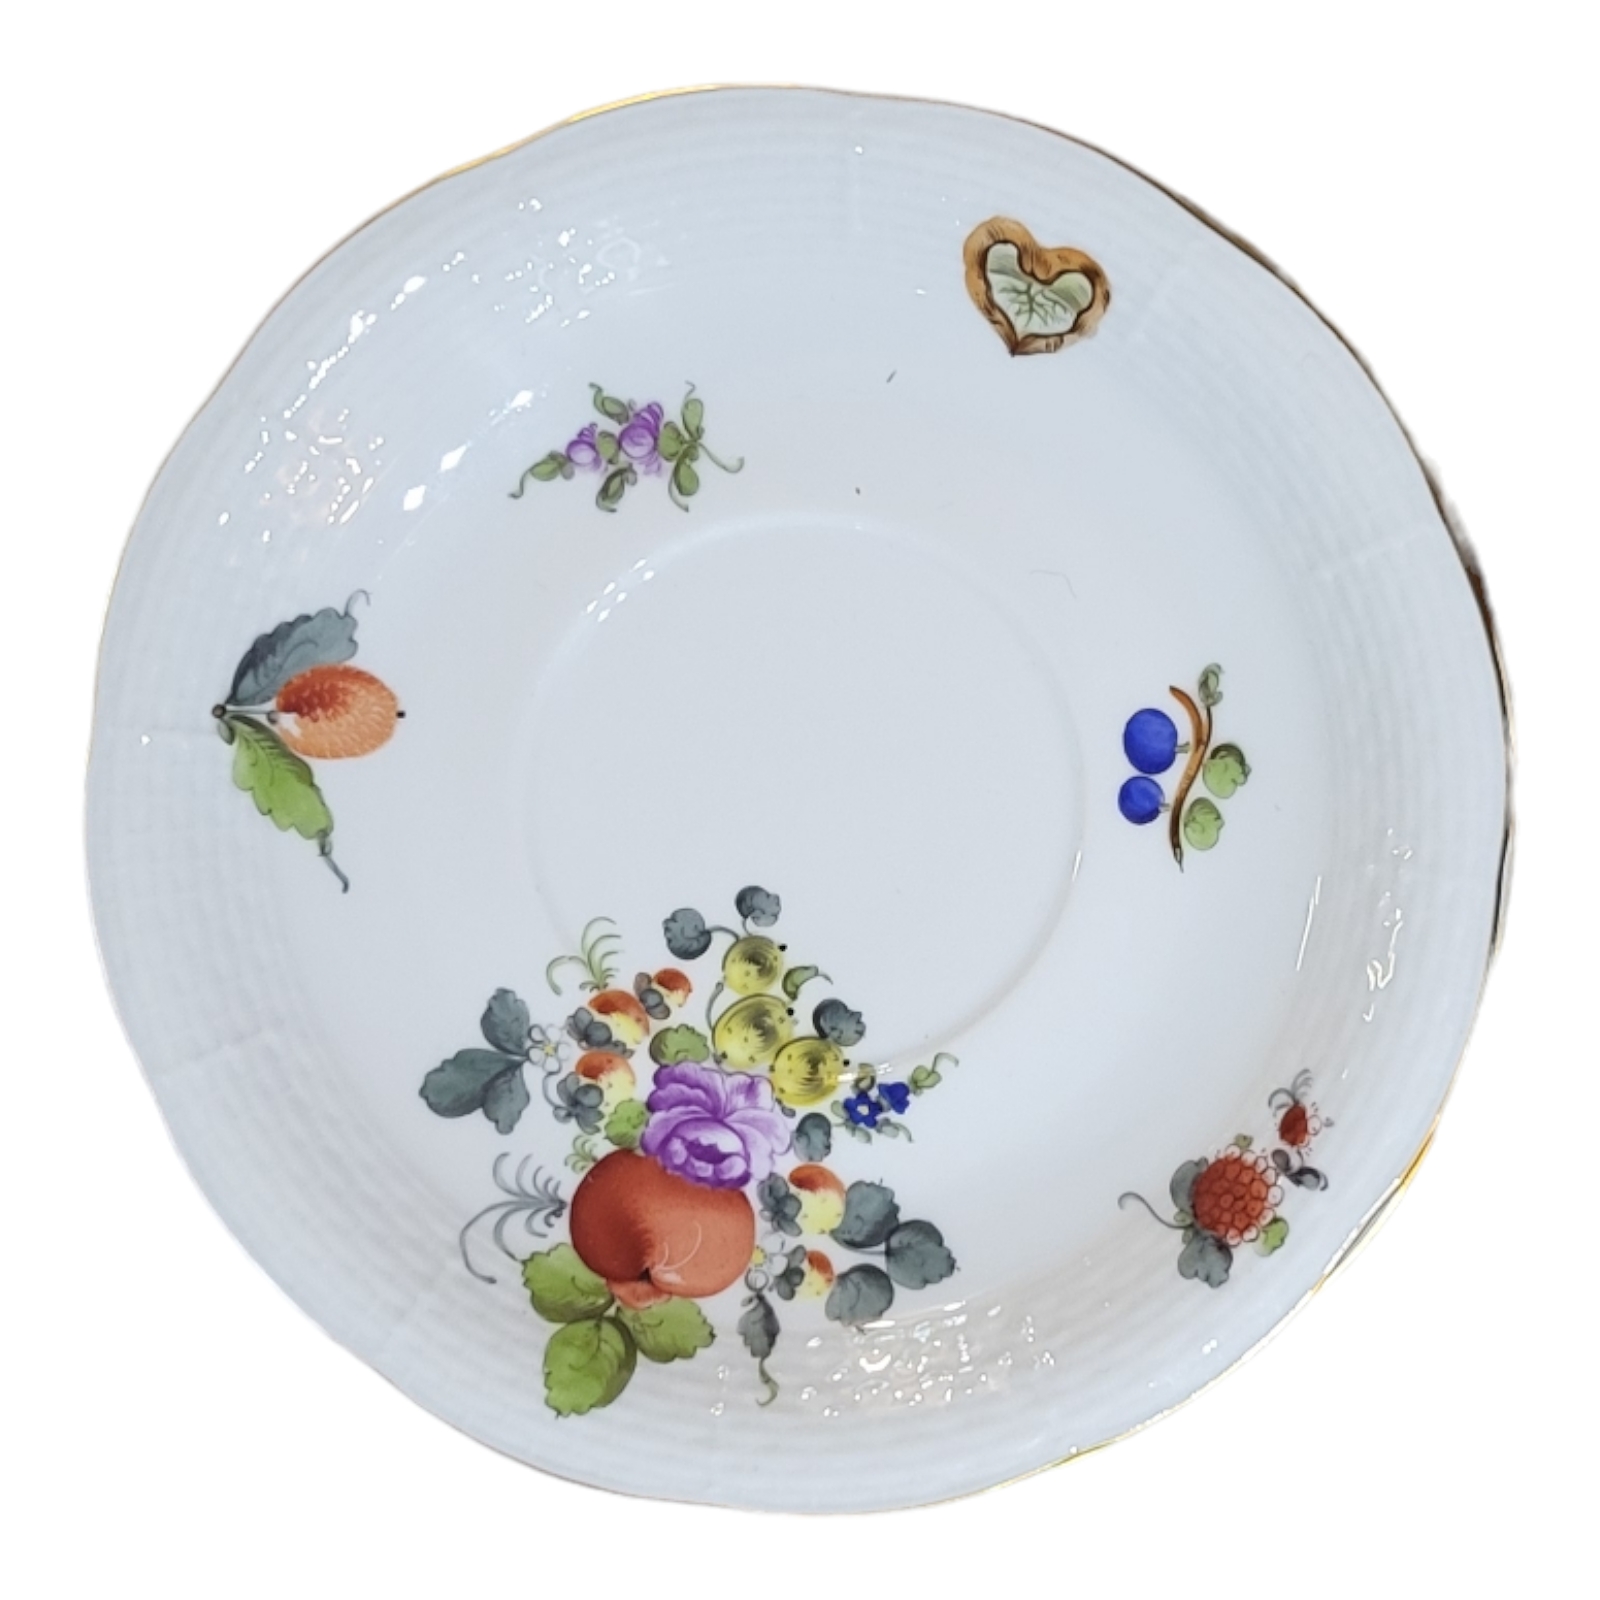 HEREND, A 20TH CENTURY HARD PORCELAIN DINNER SERVICE, CIRCA 1930 Comprising thirty-six pieces in - Image 4 of 11